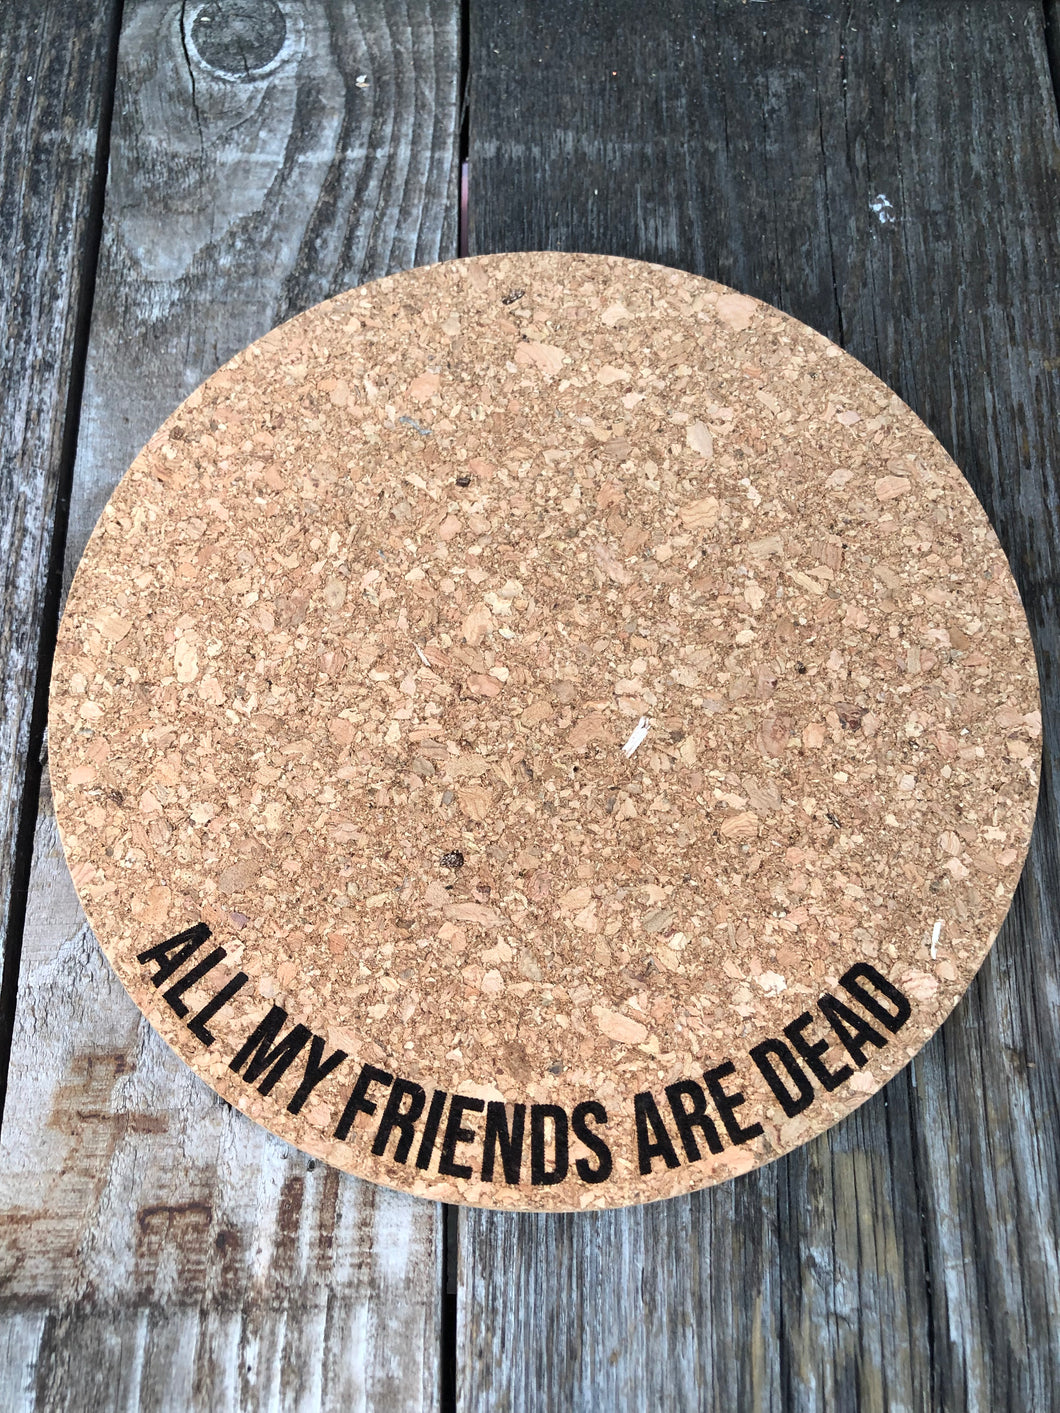 All My Friends are Dead Cork Plant Mat - Engraved Cork Round - Cork Bottom - No Plastic or Rubber - All Natural Material